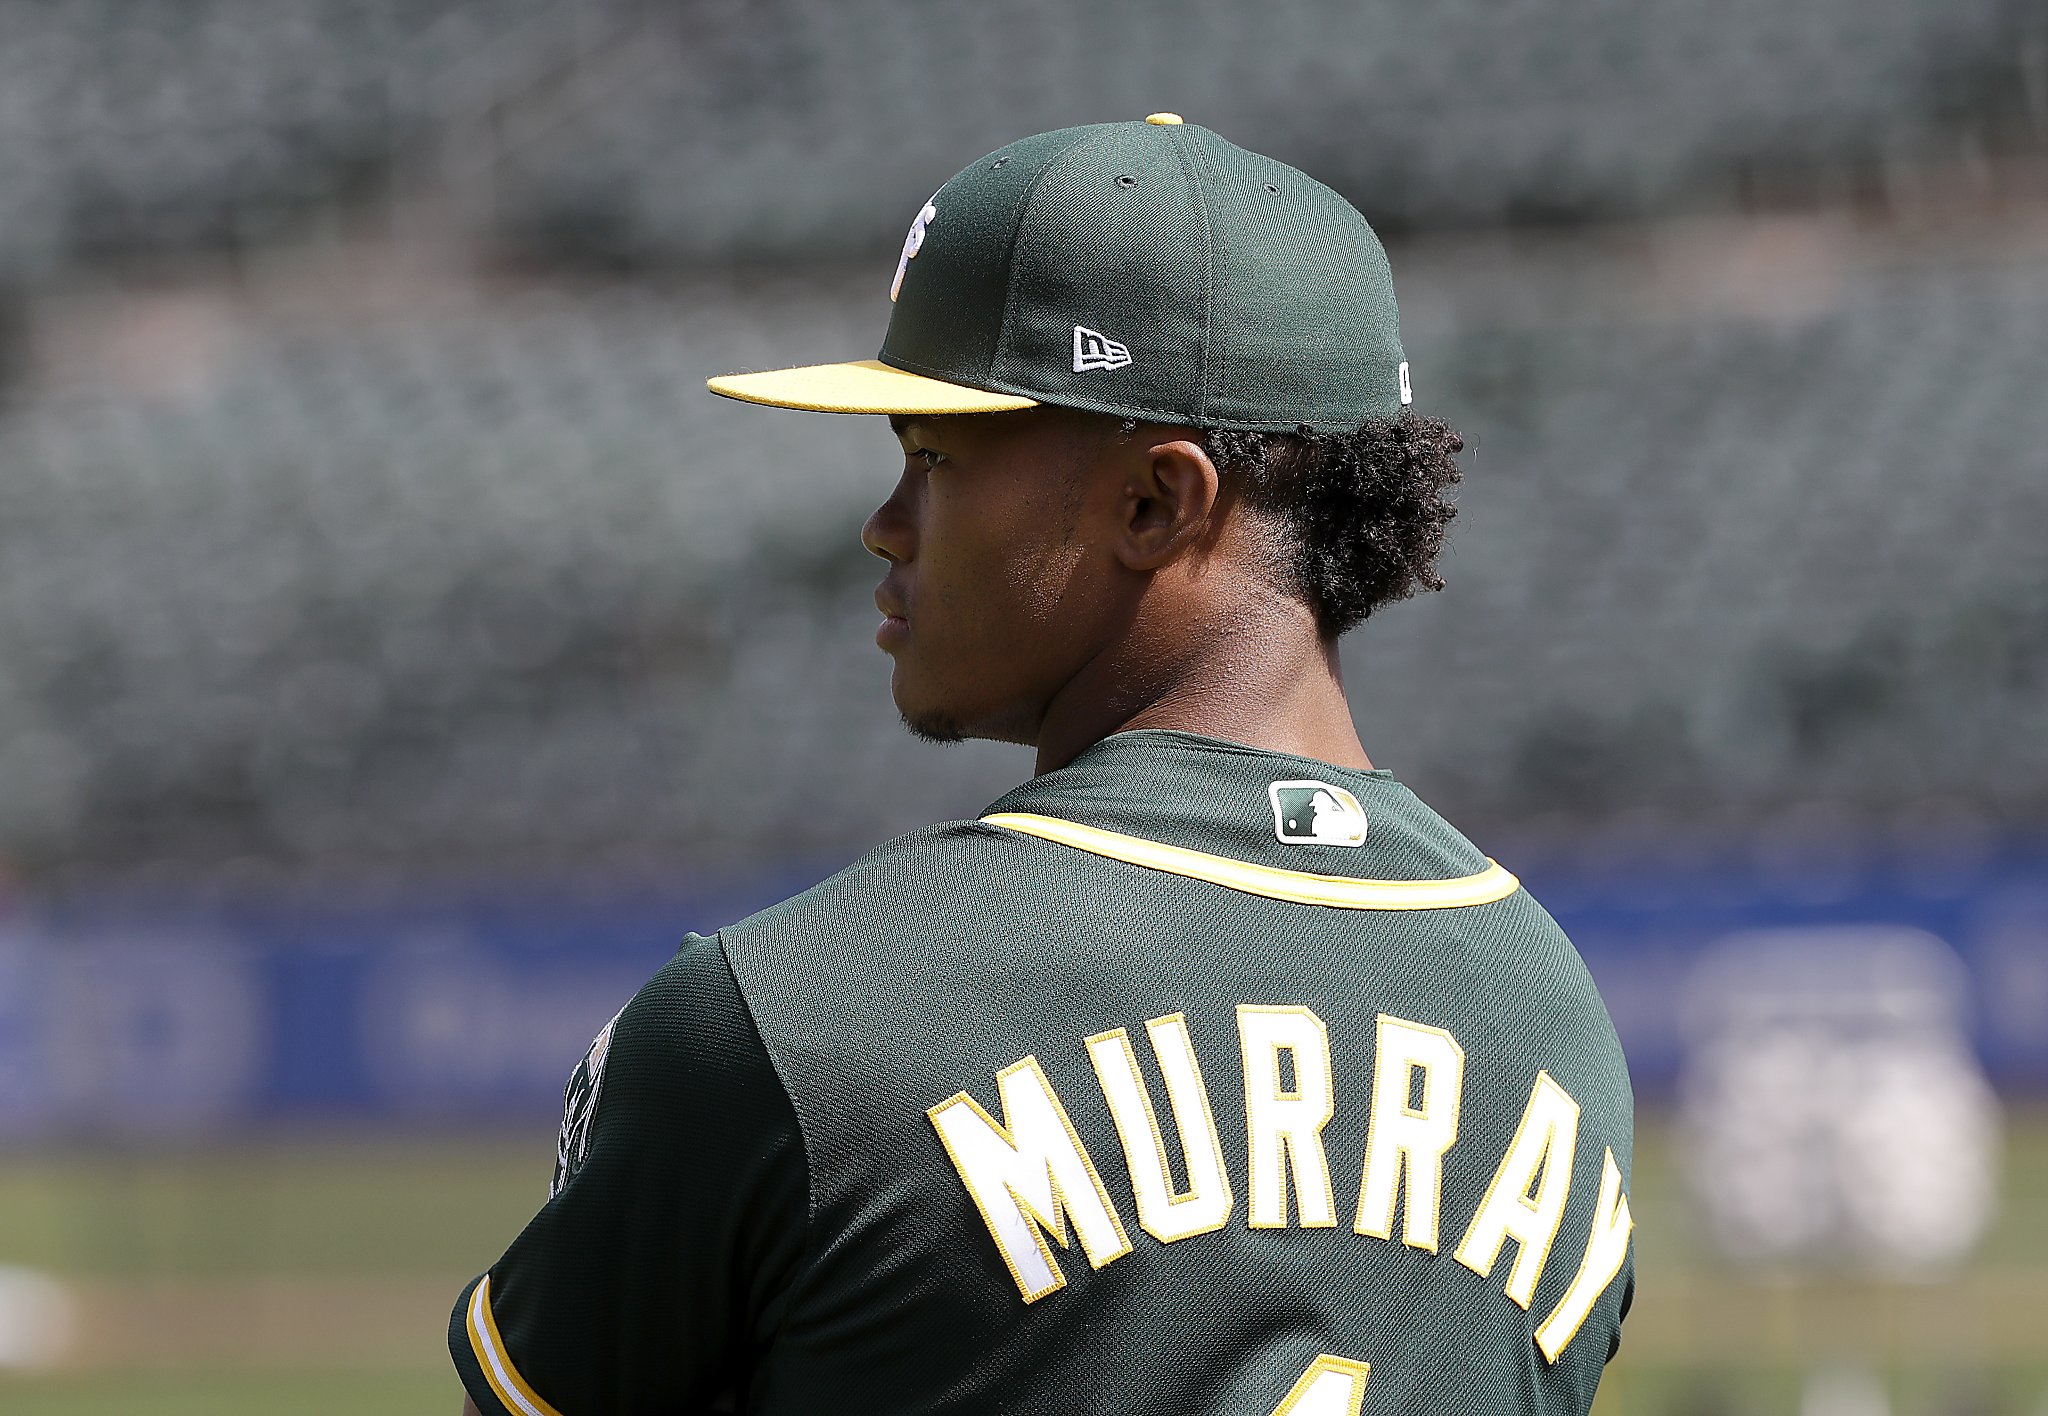 2014 ALL-USA POY Kyler Murray declares for NFL Draft over Oakland A's